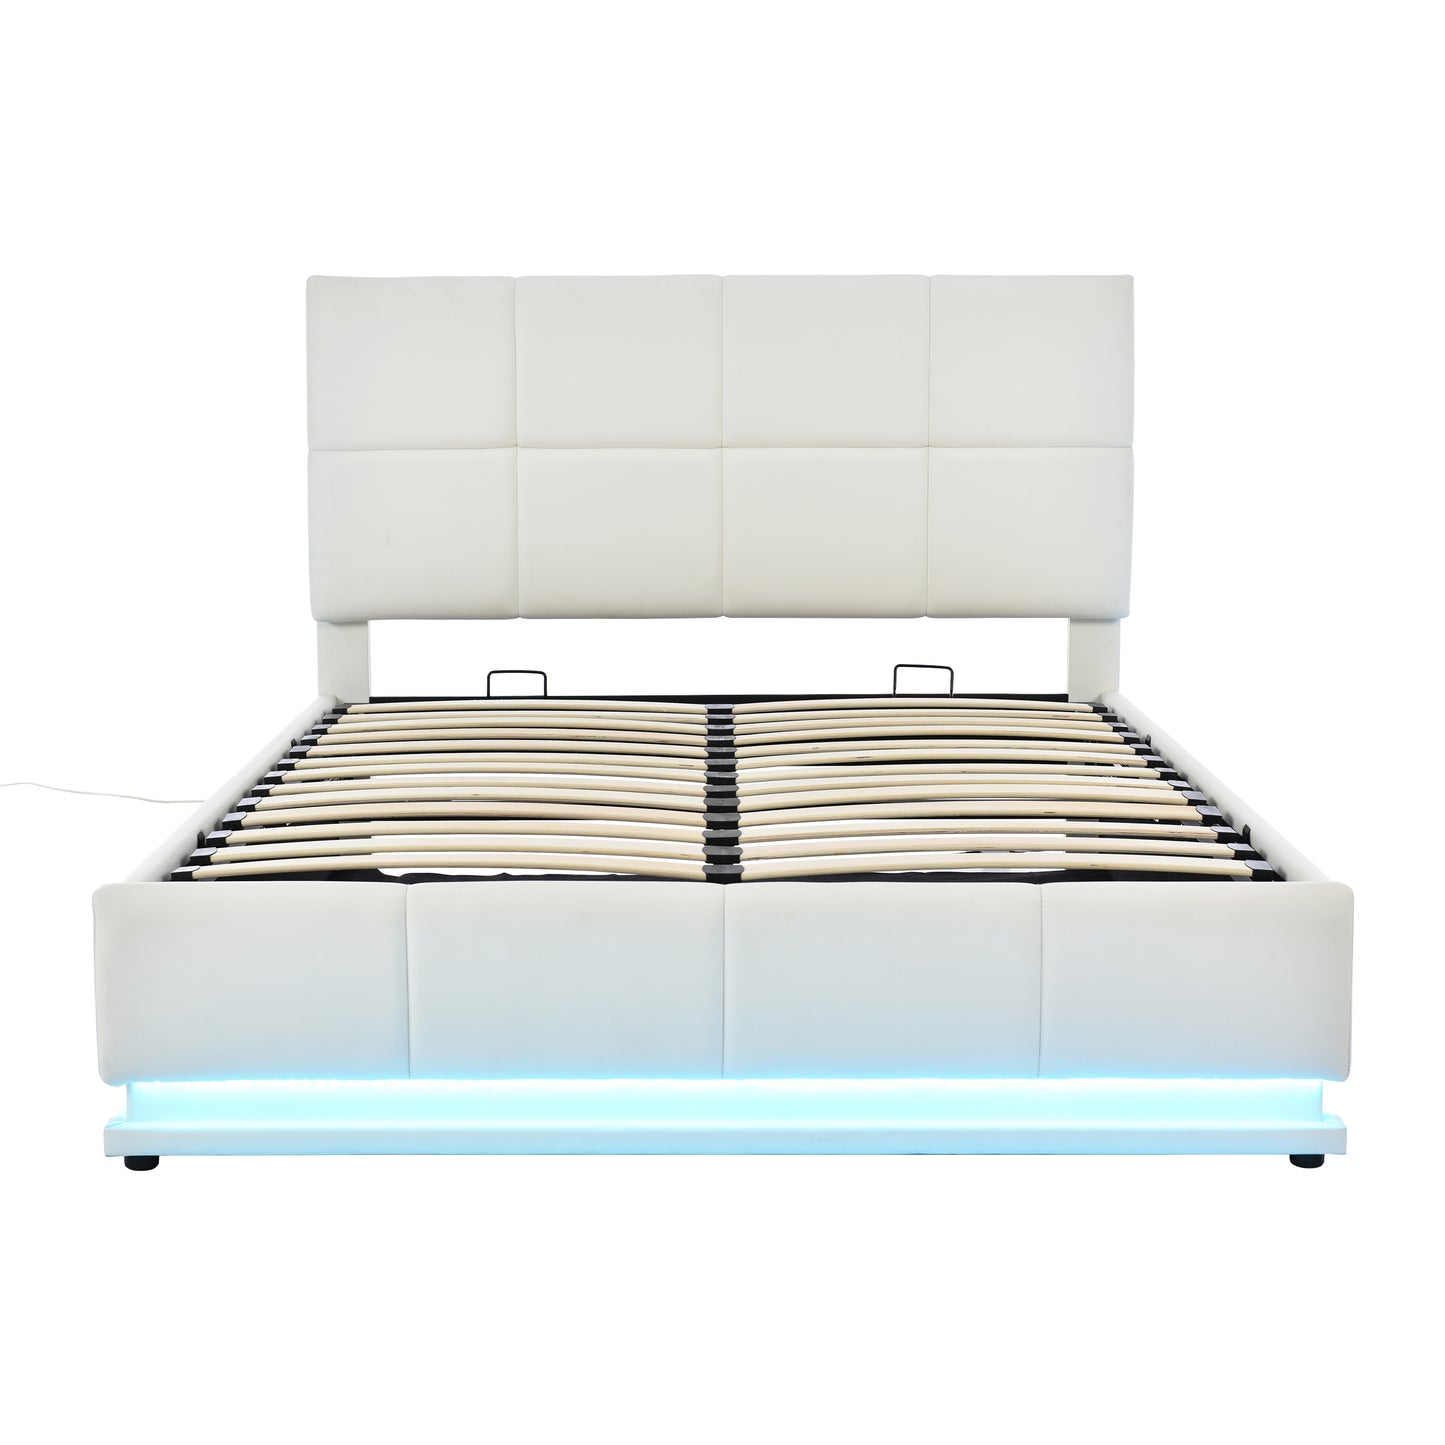 Tufted Upholstered Platform Bed with Hydraulic Storage System,Queen Size PU Storage Bed with LED Lights and USB charger, White